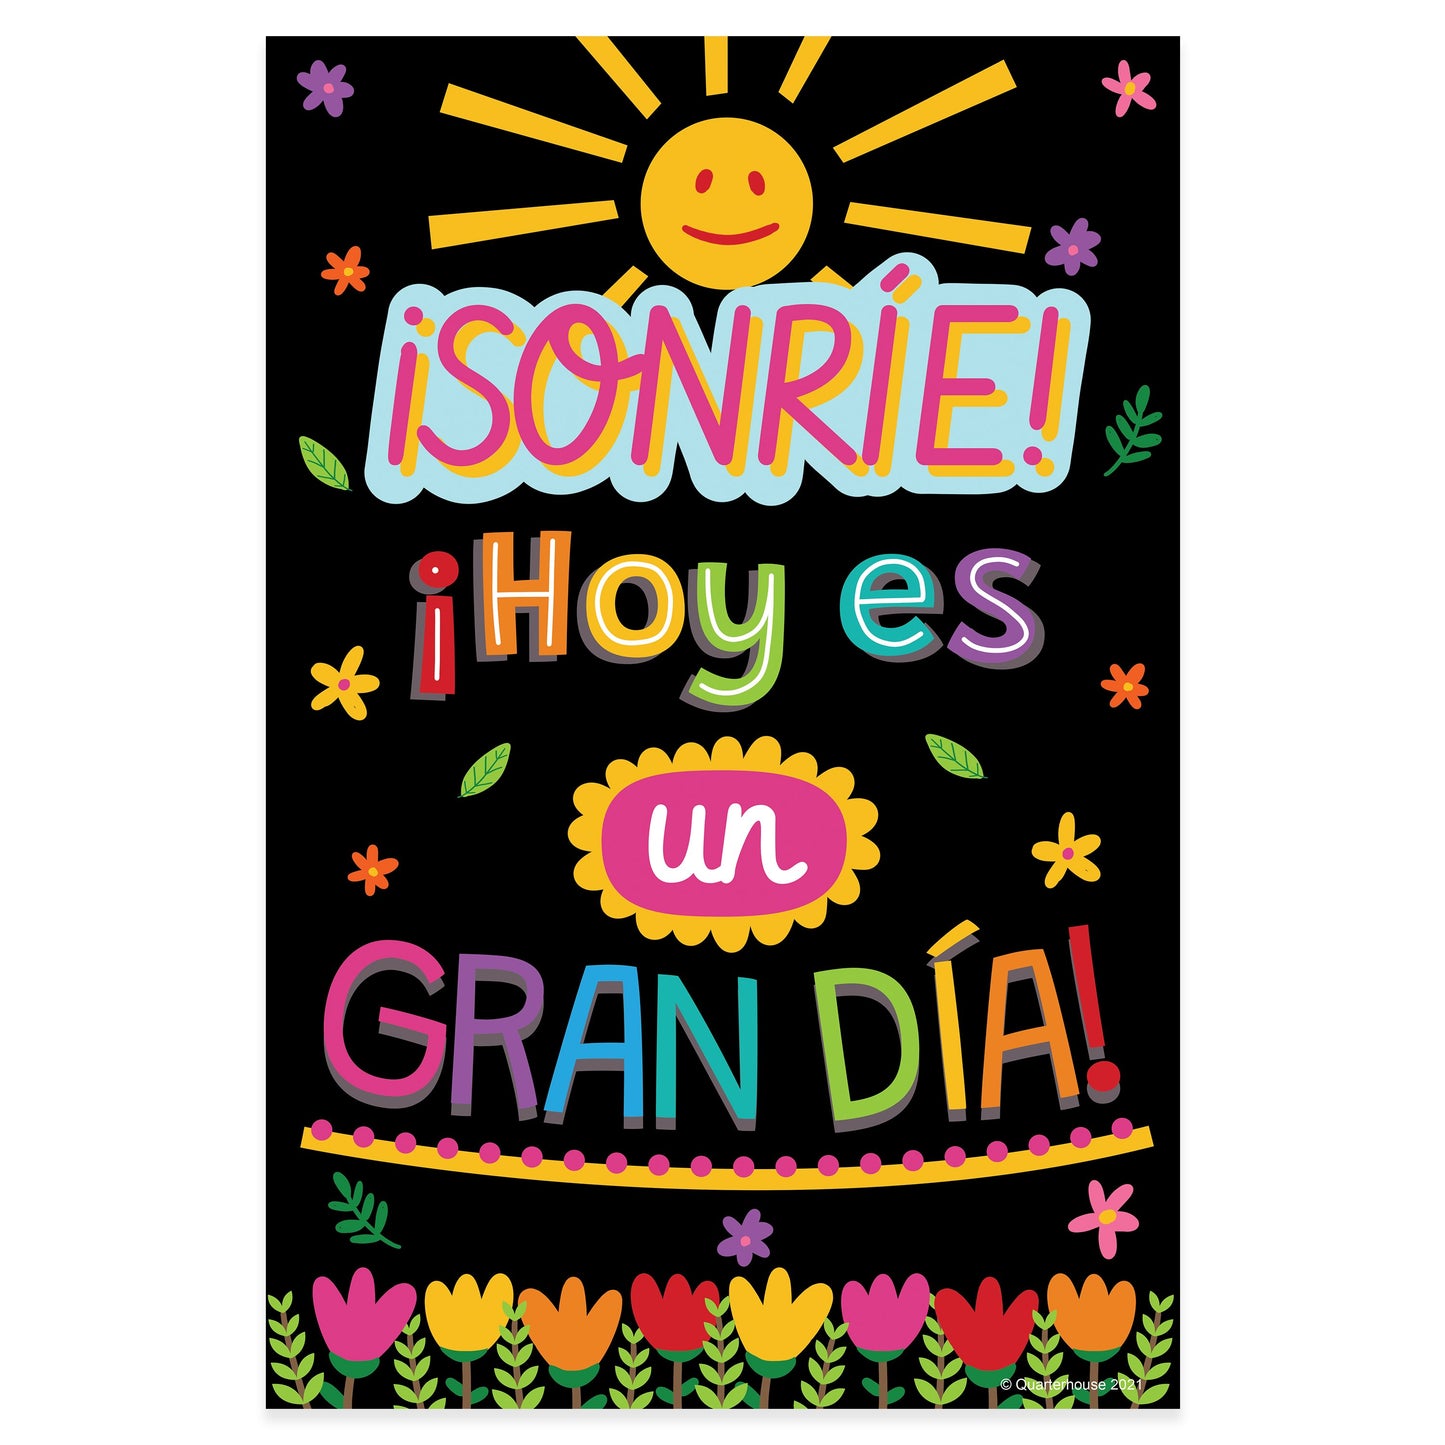 Quarterhouse 'Smile! Today is a Great Day!' Spanish Motivational (Dark-Themed) Poster, Spanish and ESL Classroom Materials for Teachers